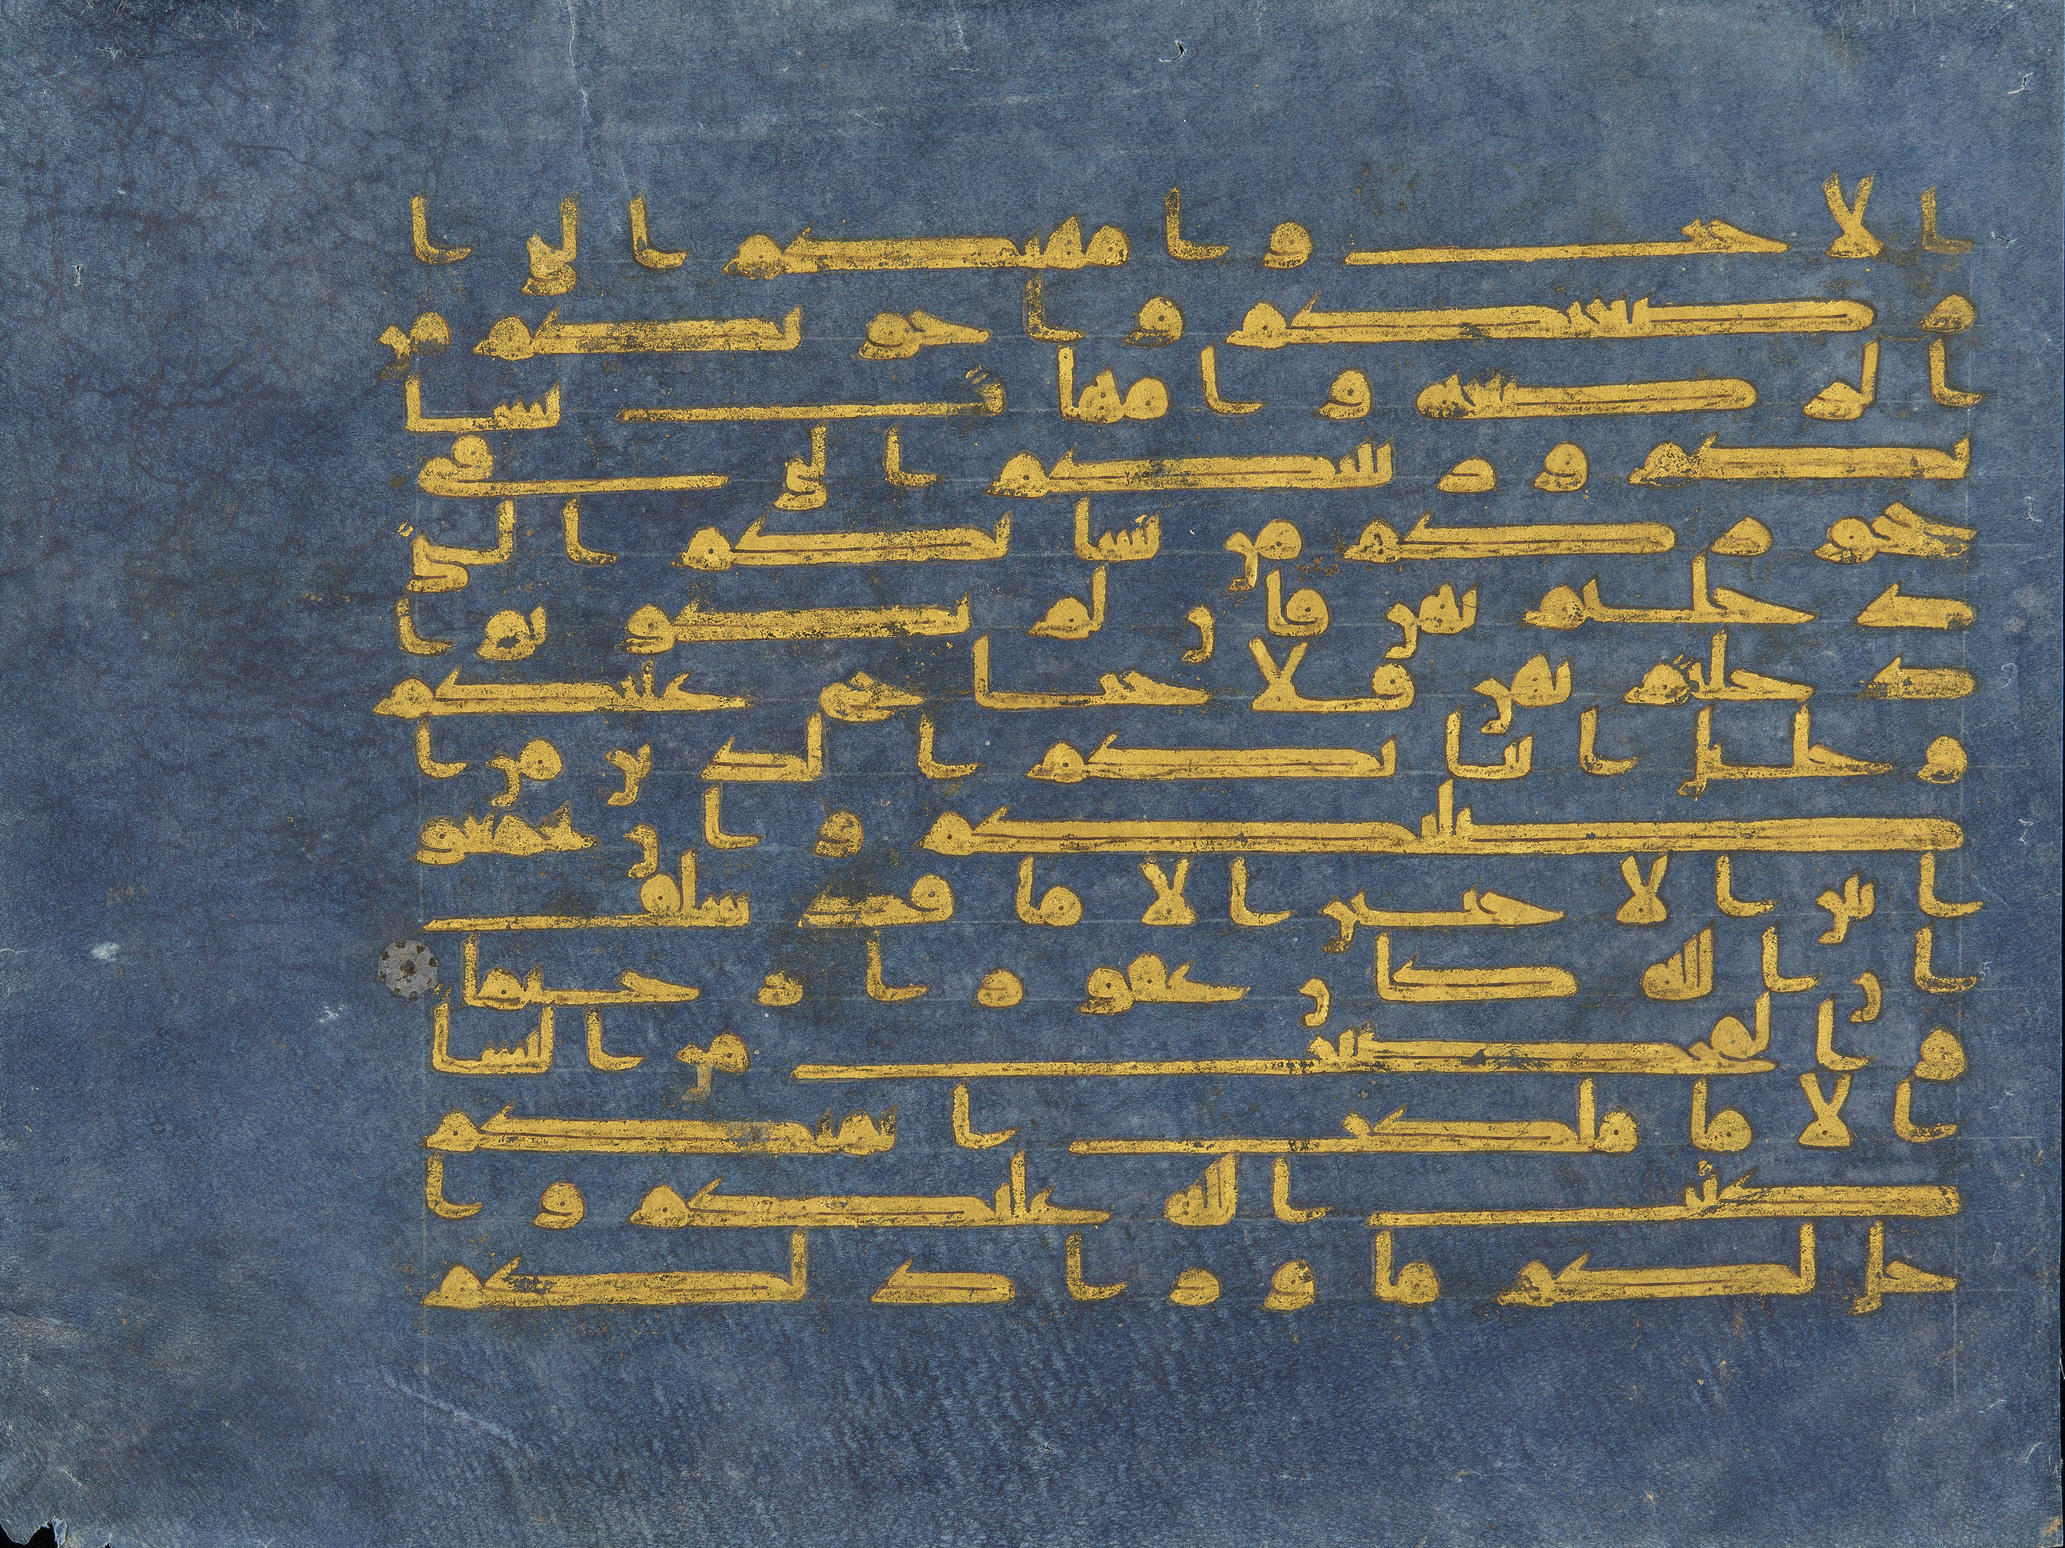 Kufic script in folio from a Qur'an, c. 900–950 C.E., gold leaf, silver and ink on parchment with indigo, 28.5 x 37.5 cm, probably made in Tunisia, Qairawan (Los Angeles County Museum of Art)